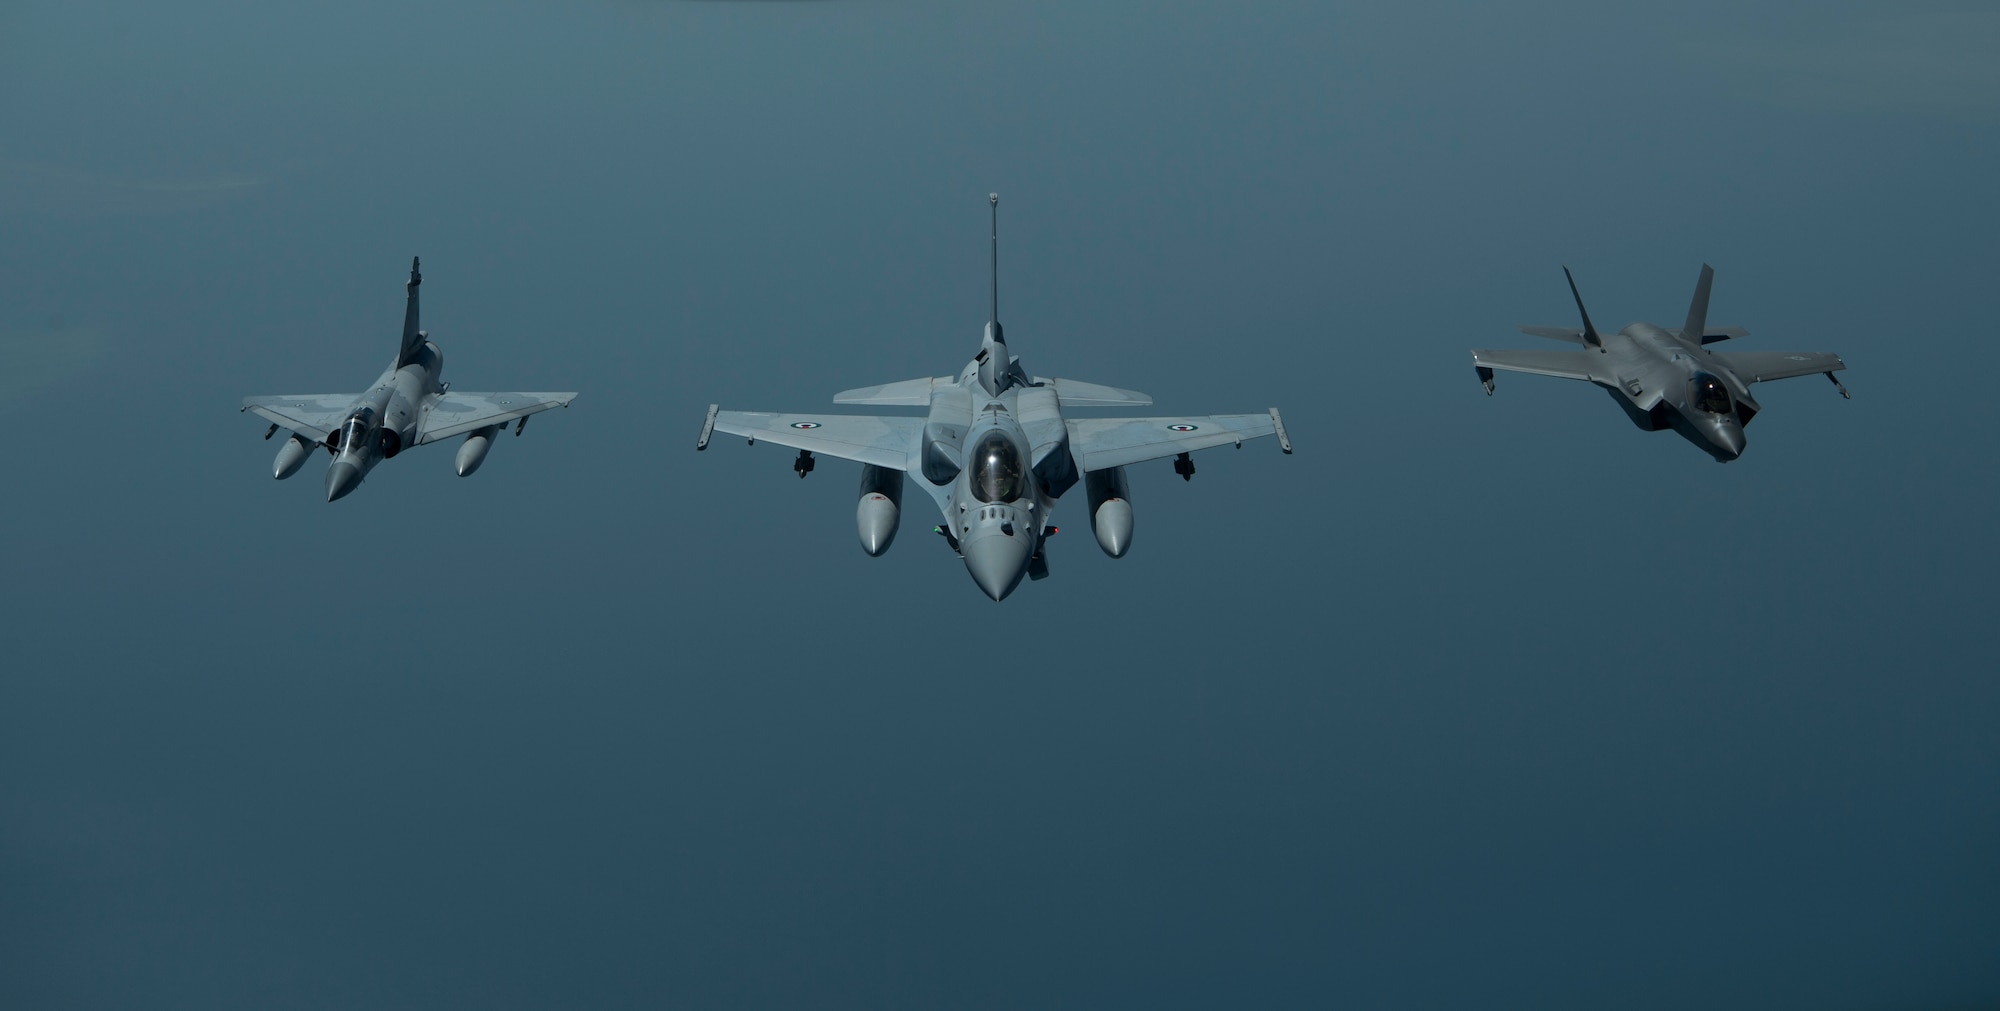 A photo of two UAE aircraft and a US aircraft flying in formation.